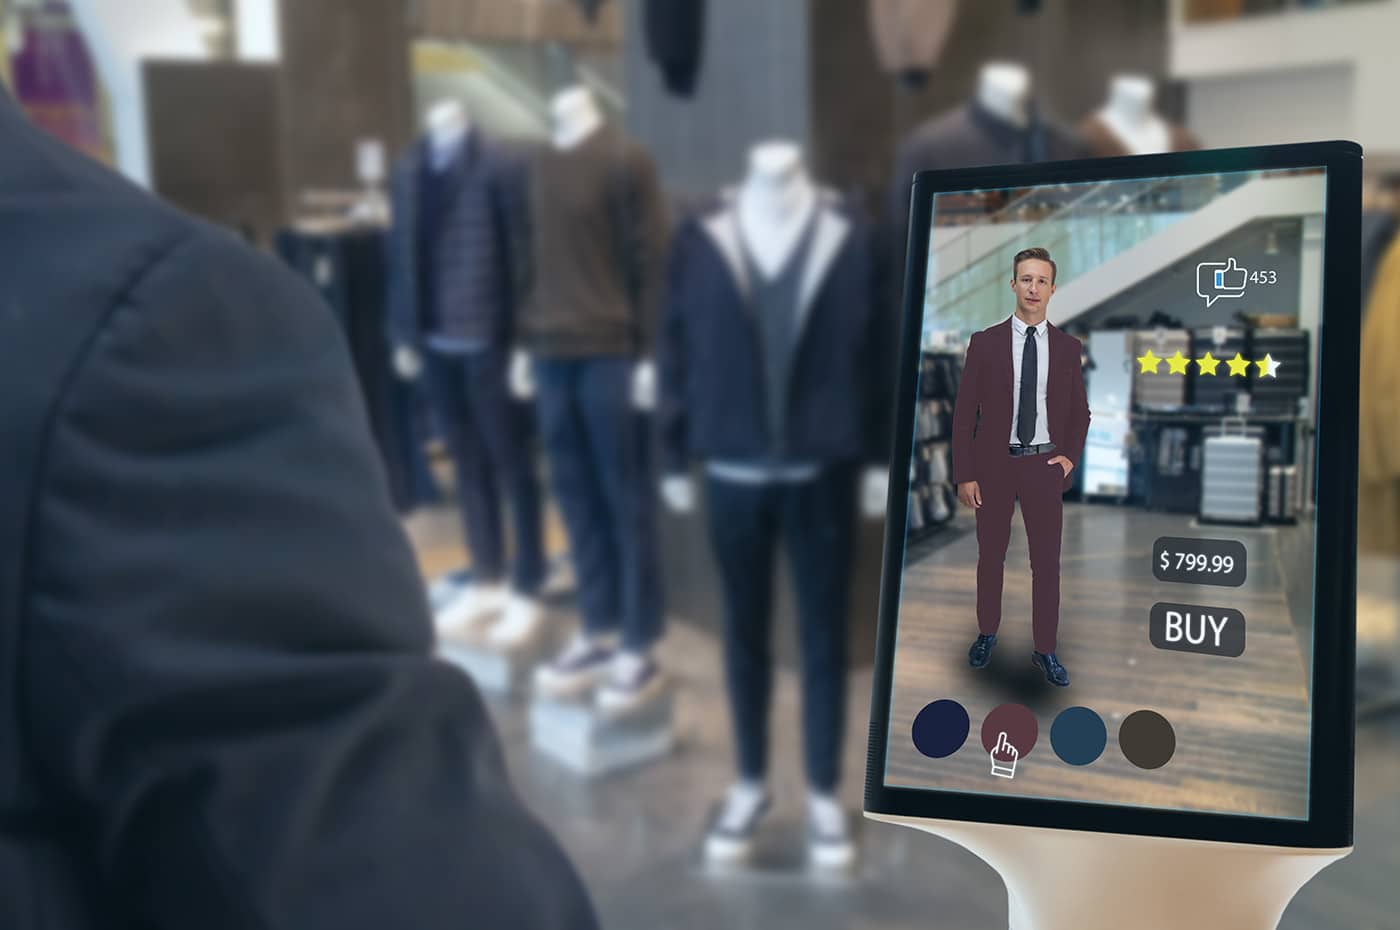 In Store Augmented Reality